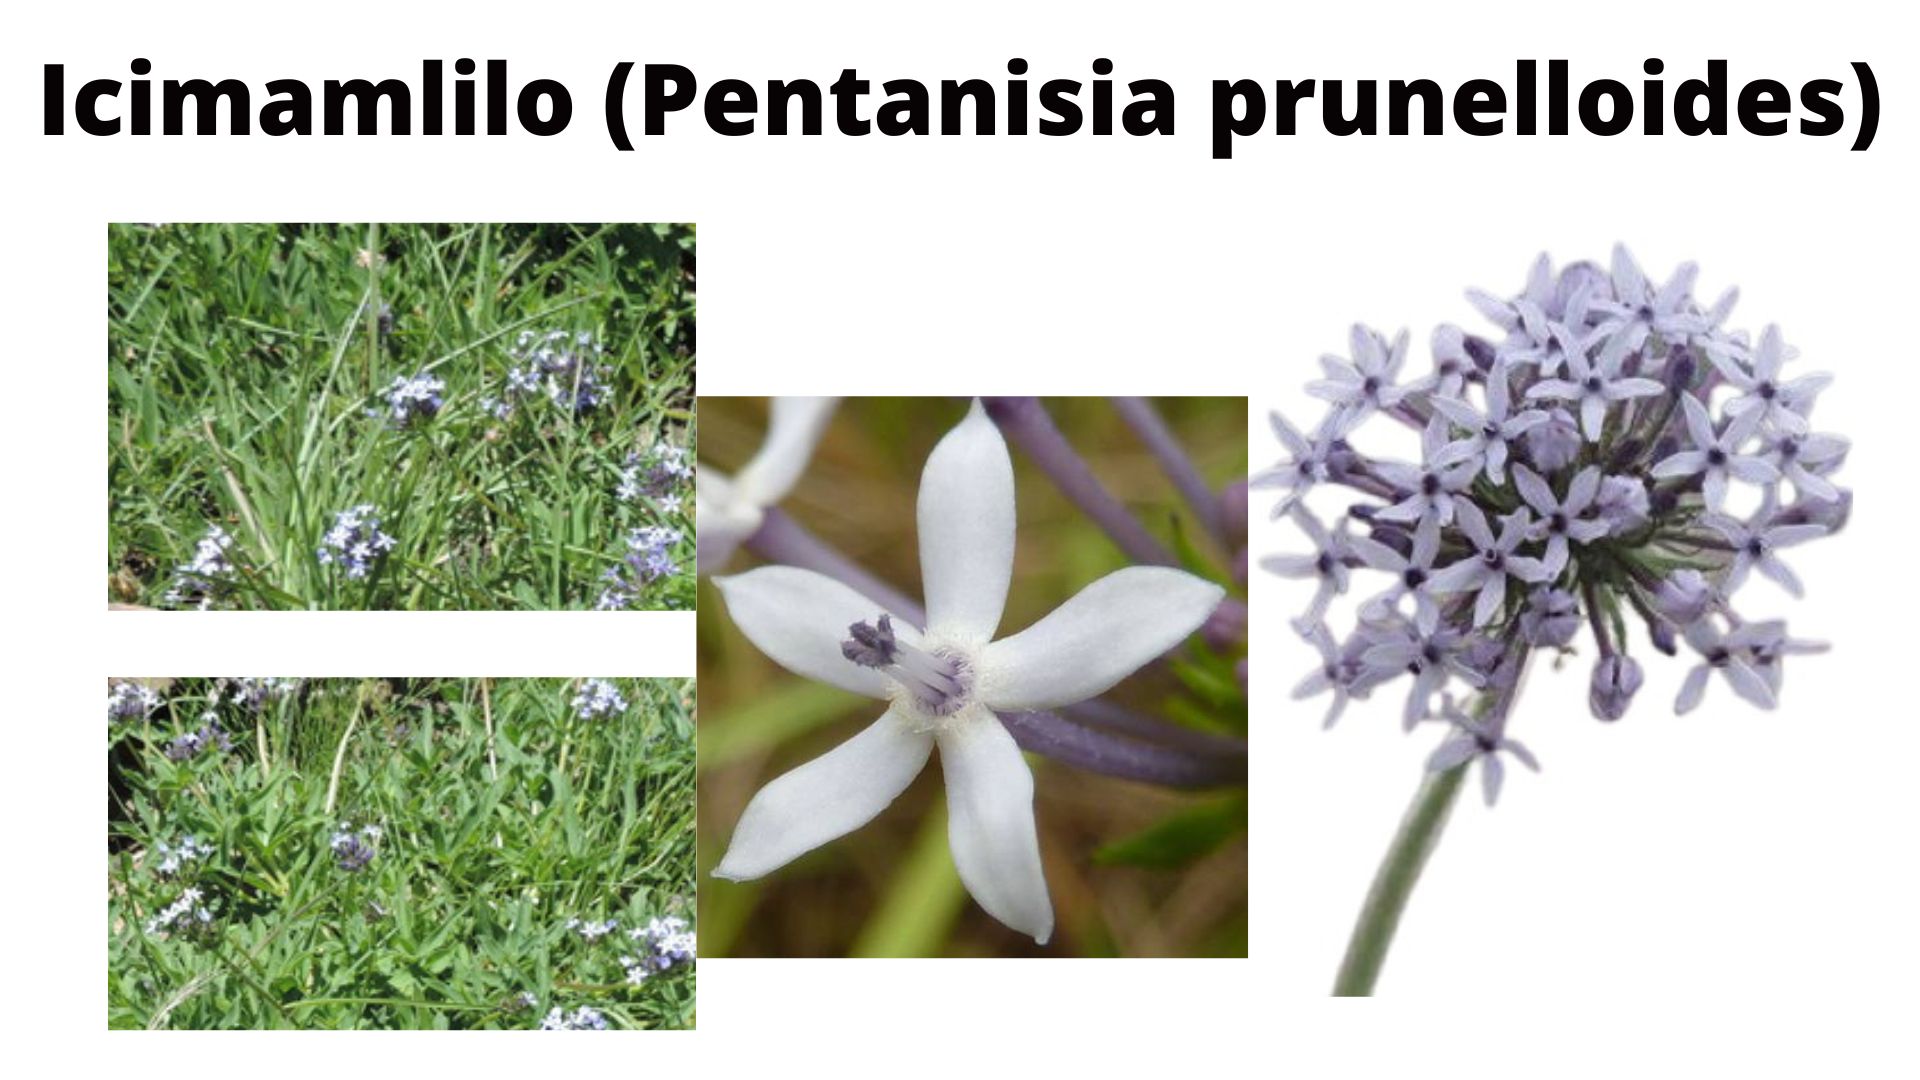 You are currently viewing Pentanisia prunelloides (Icimamlilo)